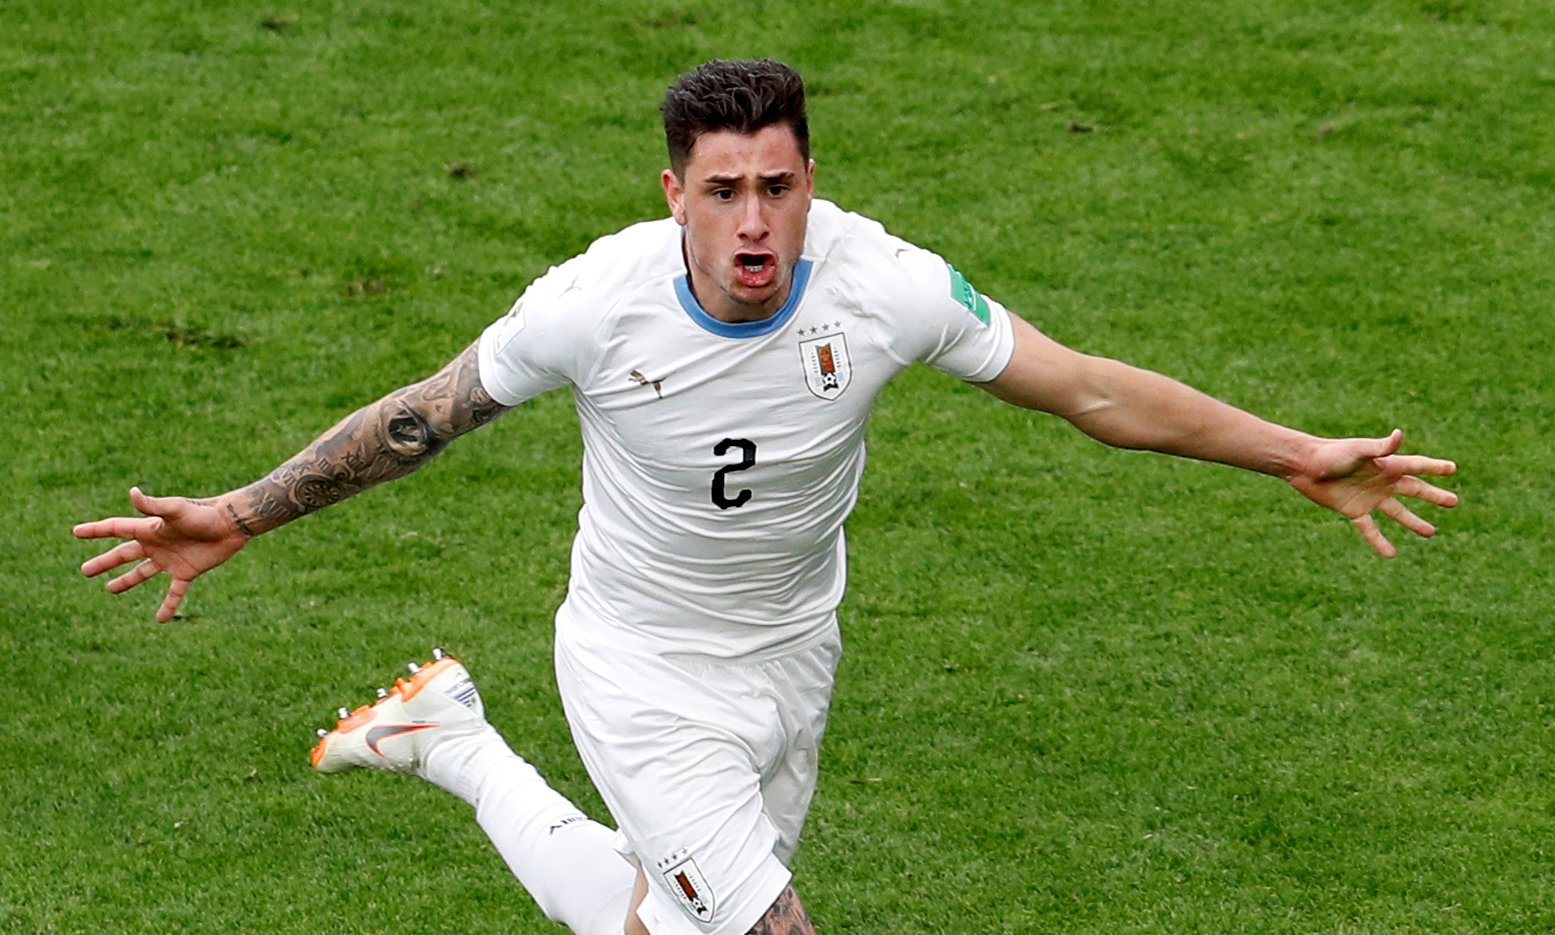 Jose Gimenez best players in the FIFA World Cup so far- Round 1